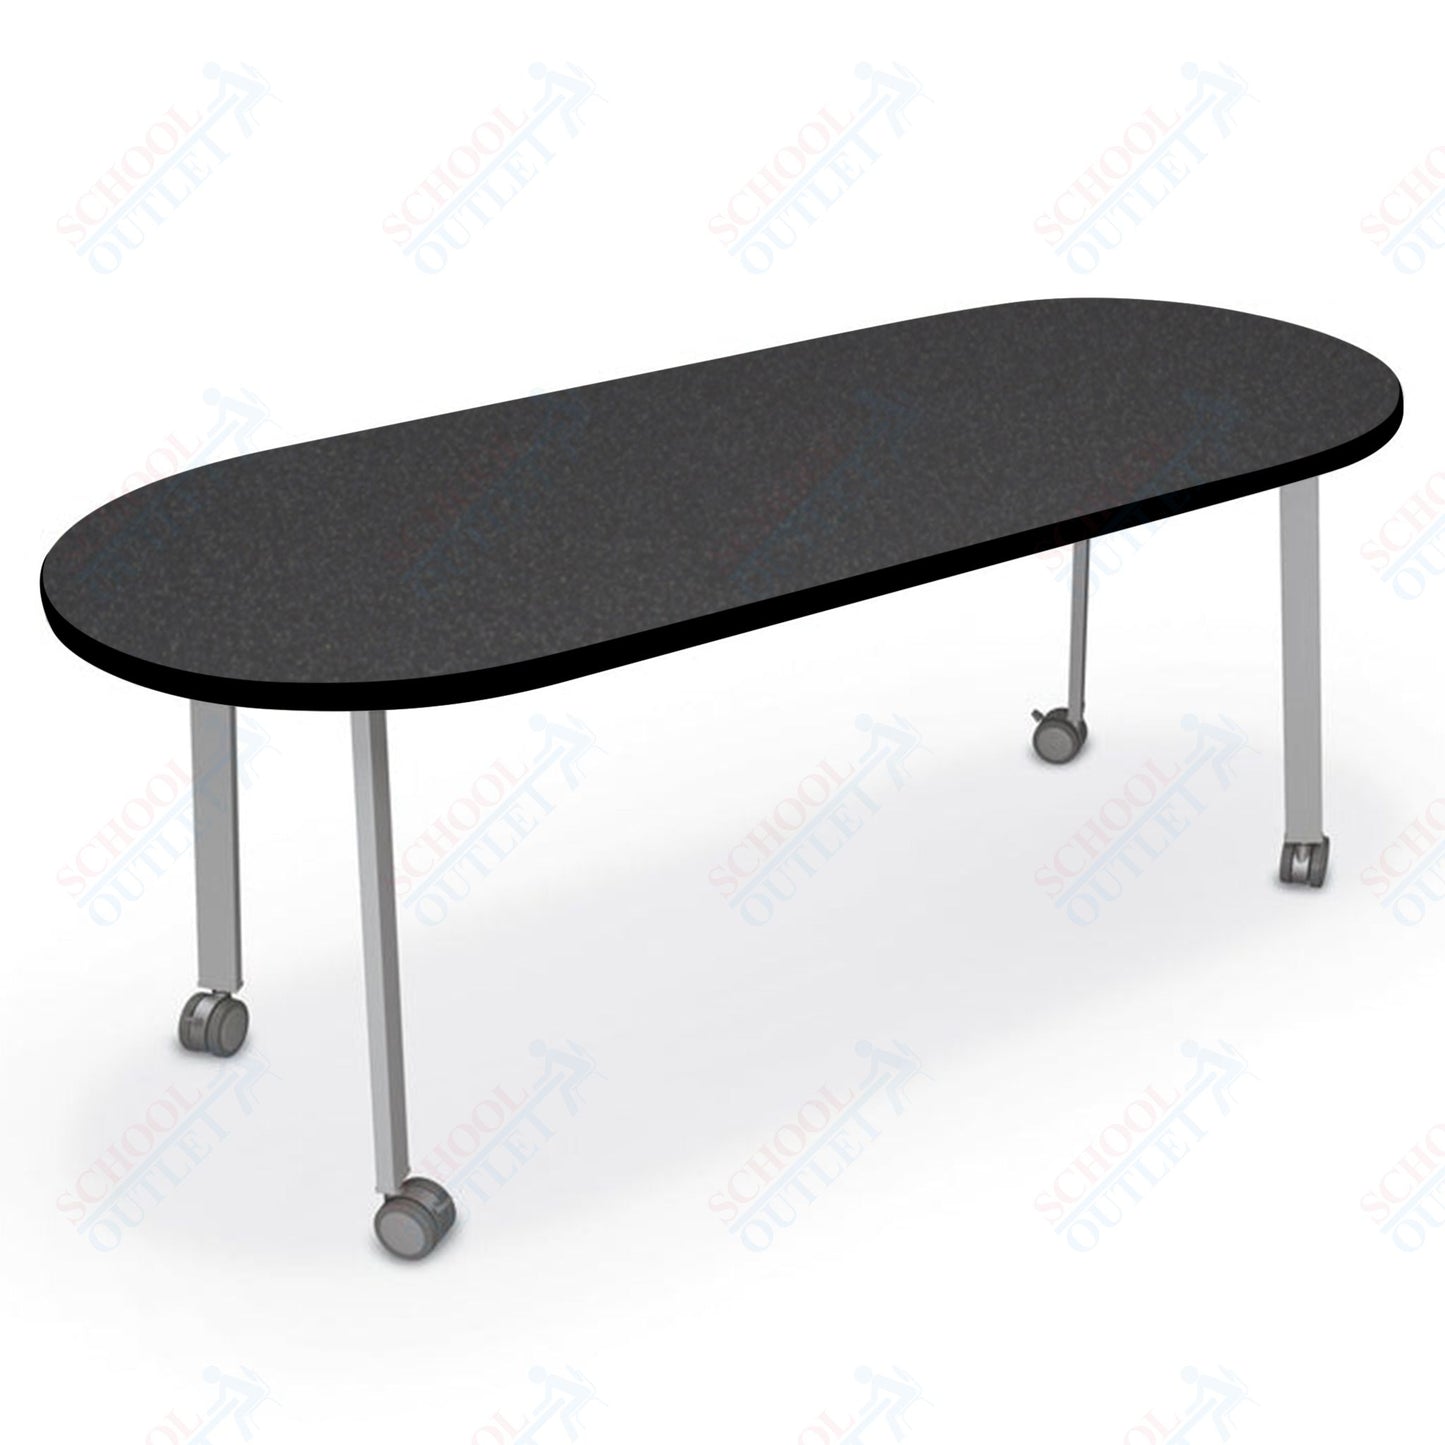 Mooreco Akt Table – 30"D x 72"W Racetrack, Laminate Top, Fixed Height Available in 29"H, 36"H, or 42"H